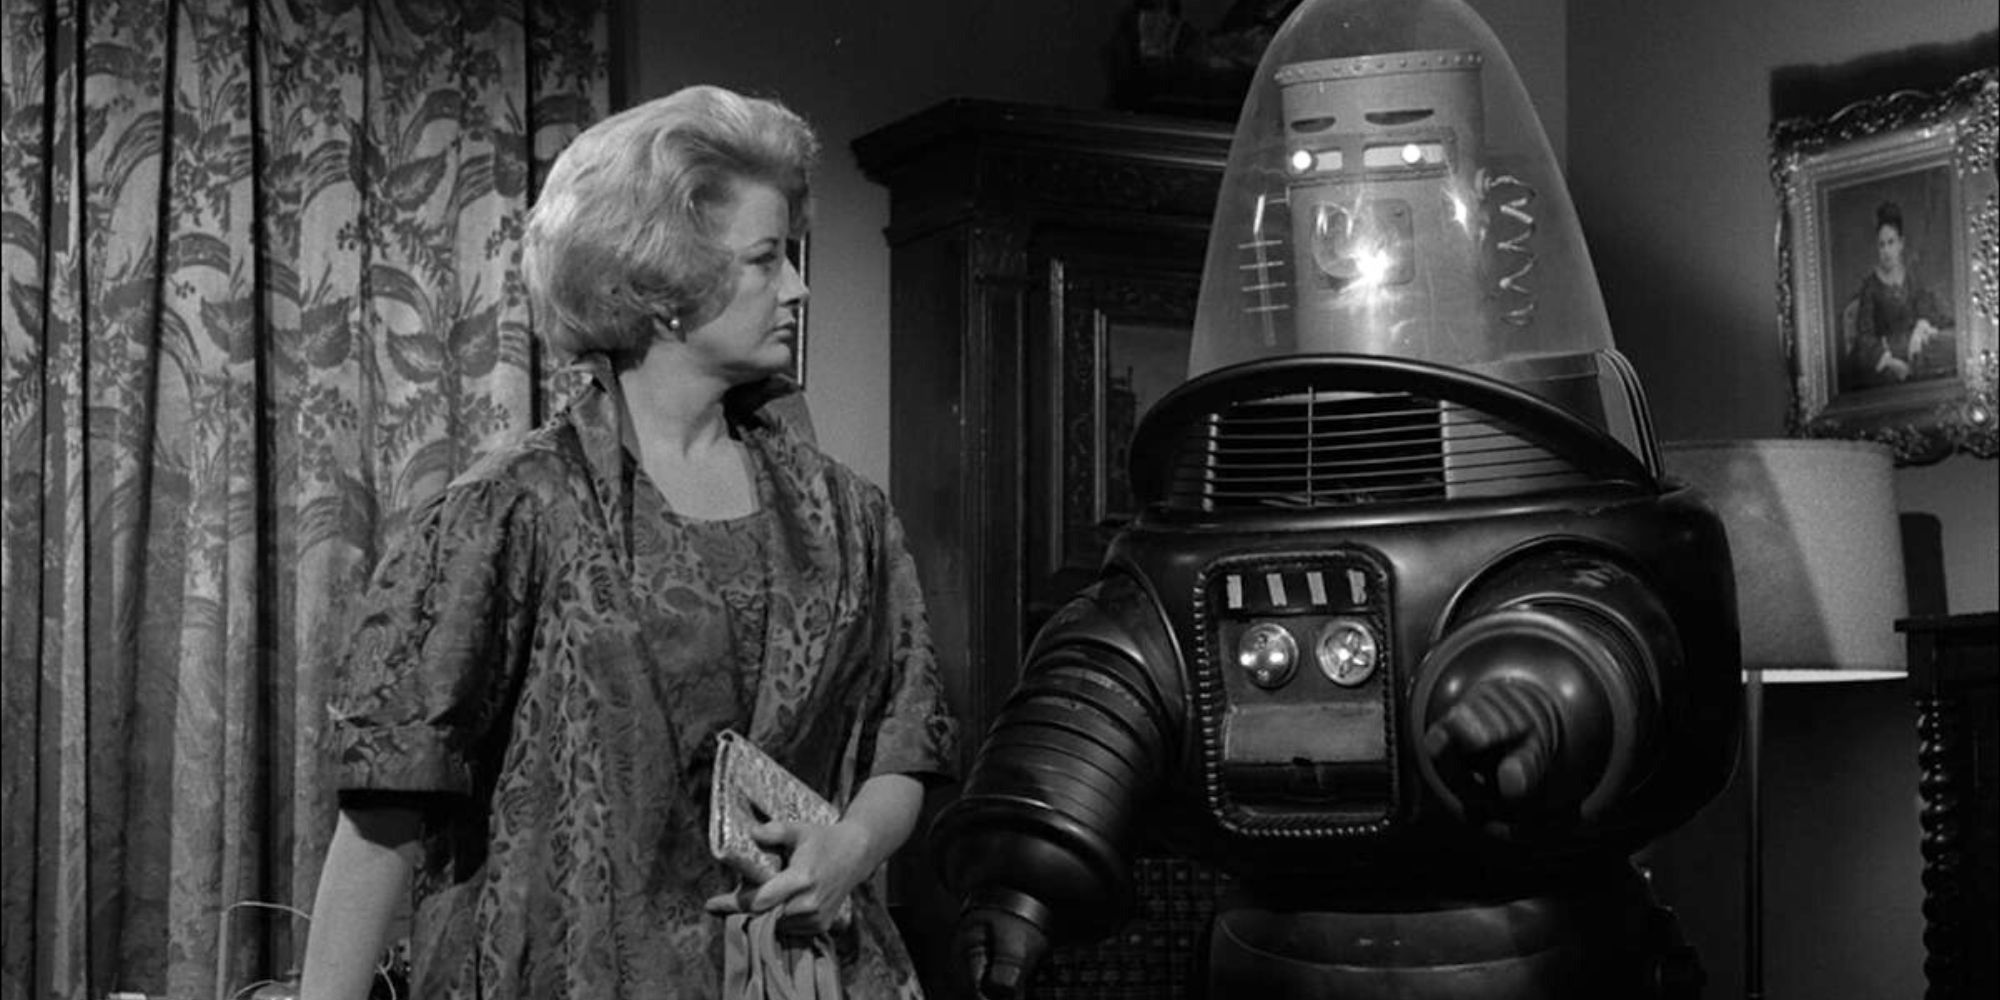 Constance Ford standing next to a giant robot in The Twilight Zone